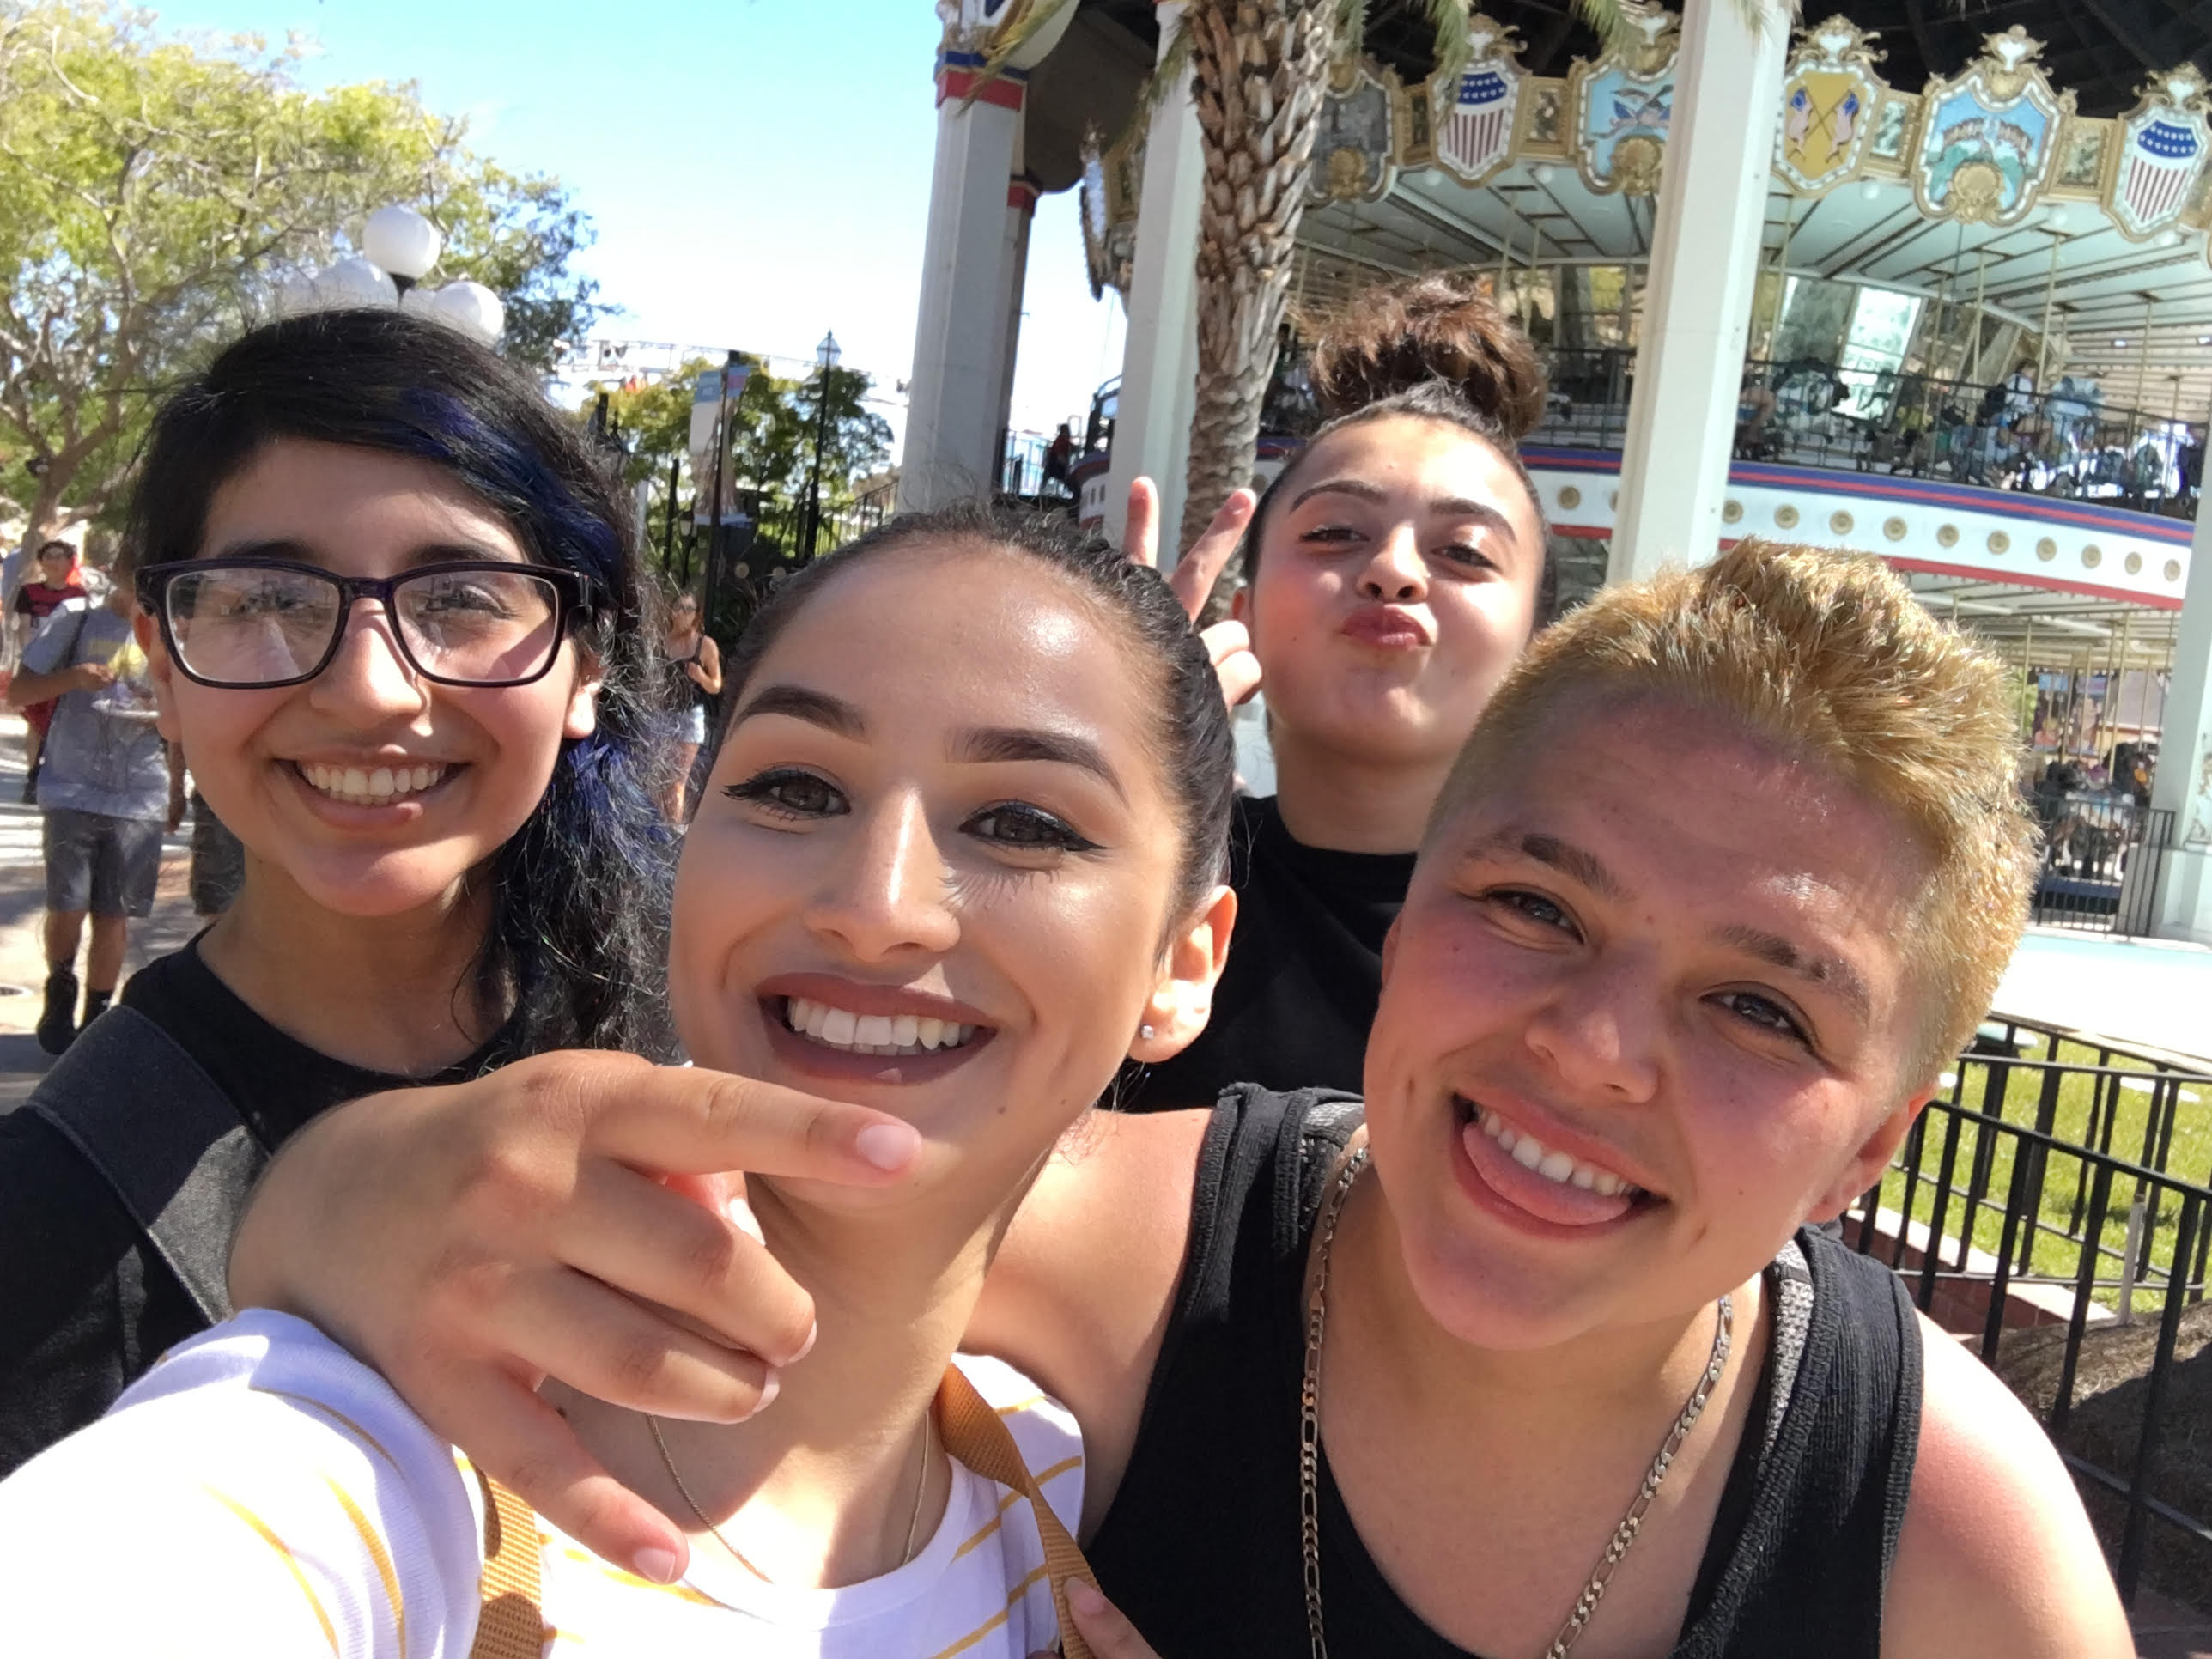 CJCJ Mentor, Elena, and her mentees take a fun photo together at California's Great America.